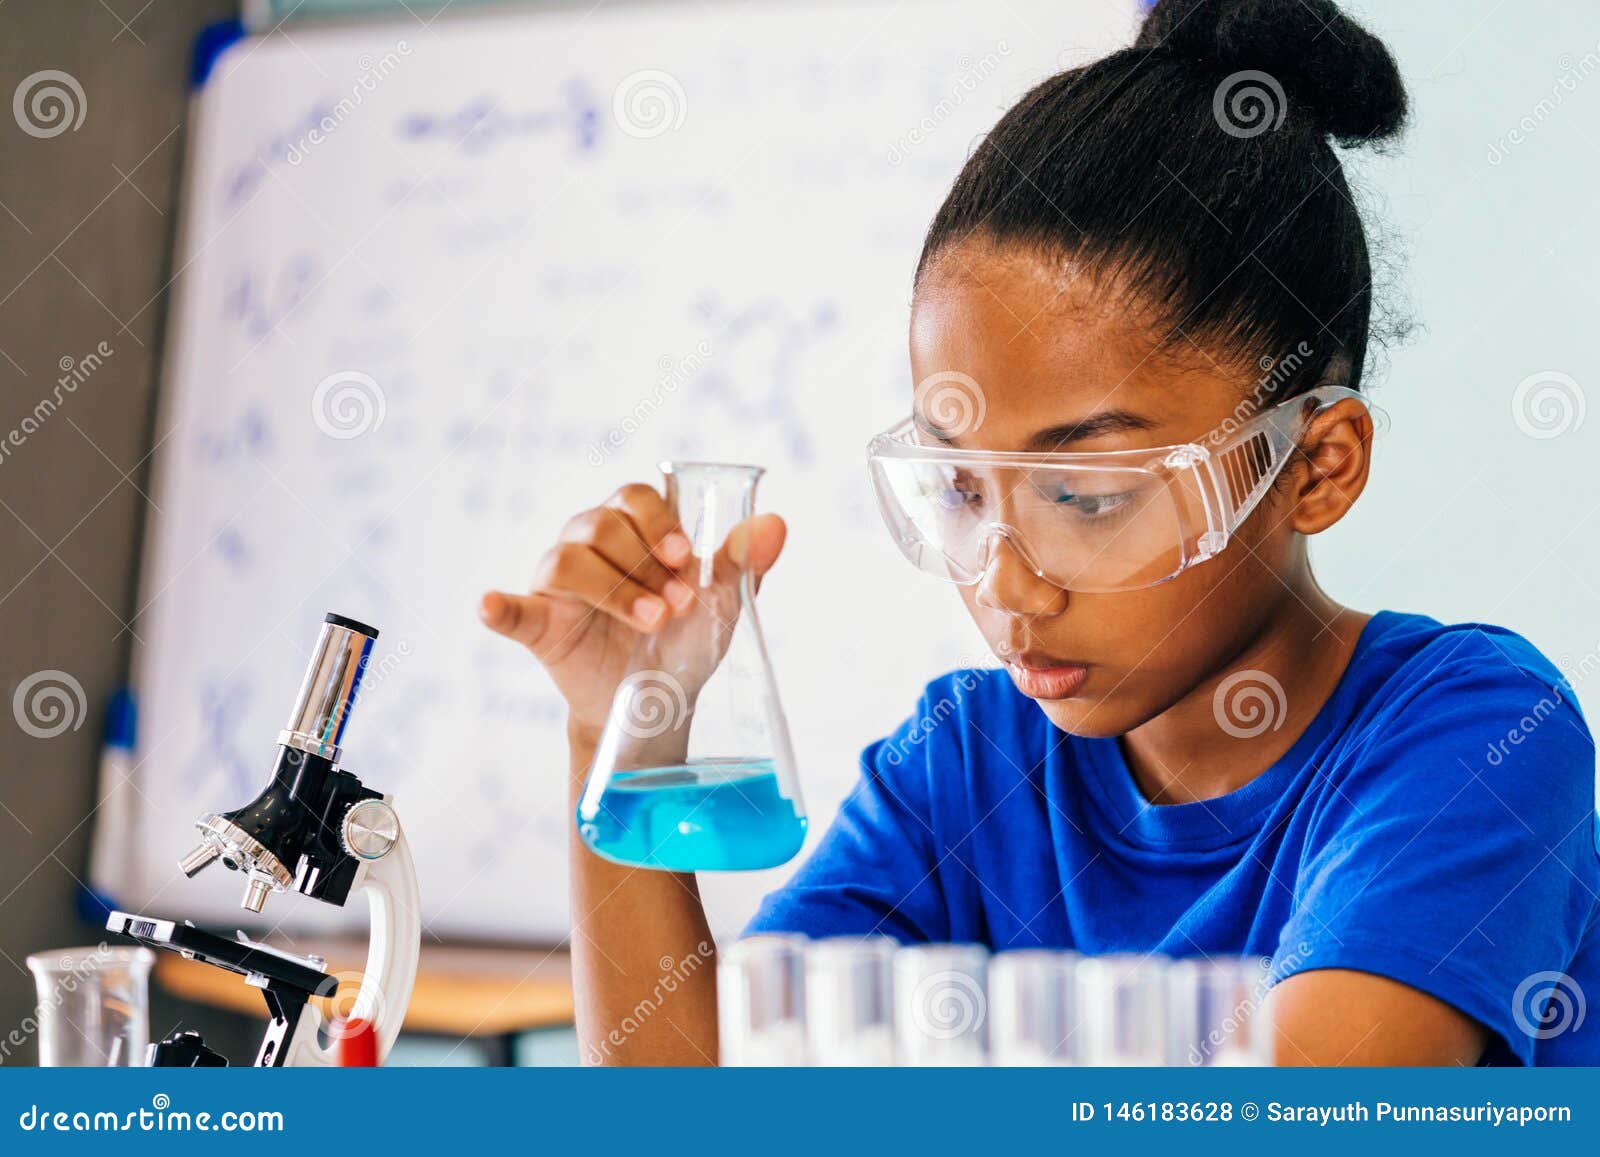 young african american kid doing chemistry experiment